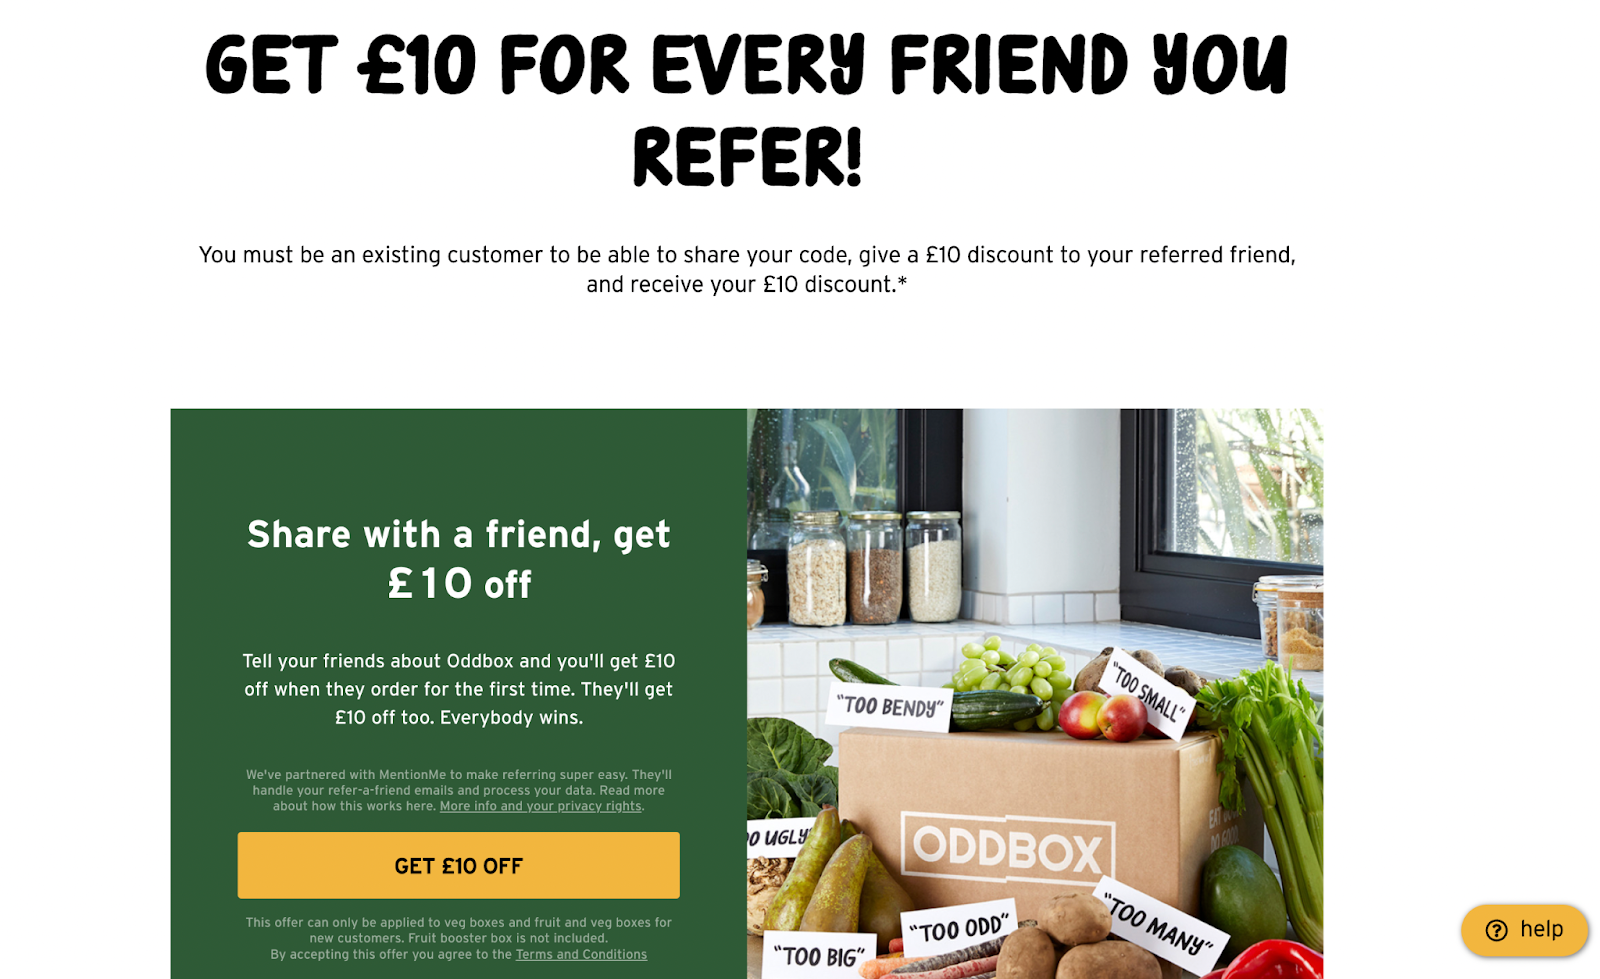 Referral marketing example for Oddbox